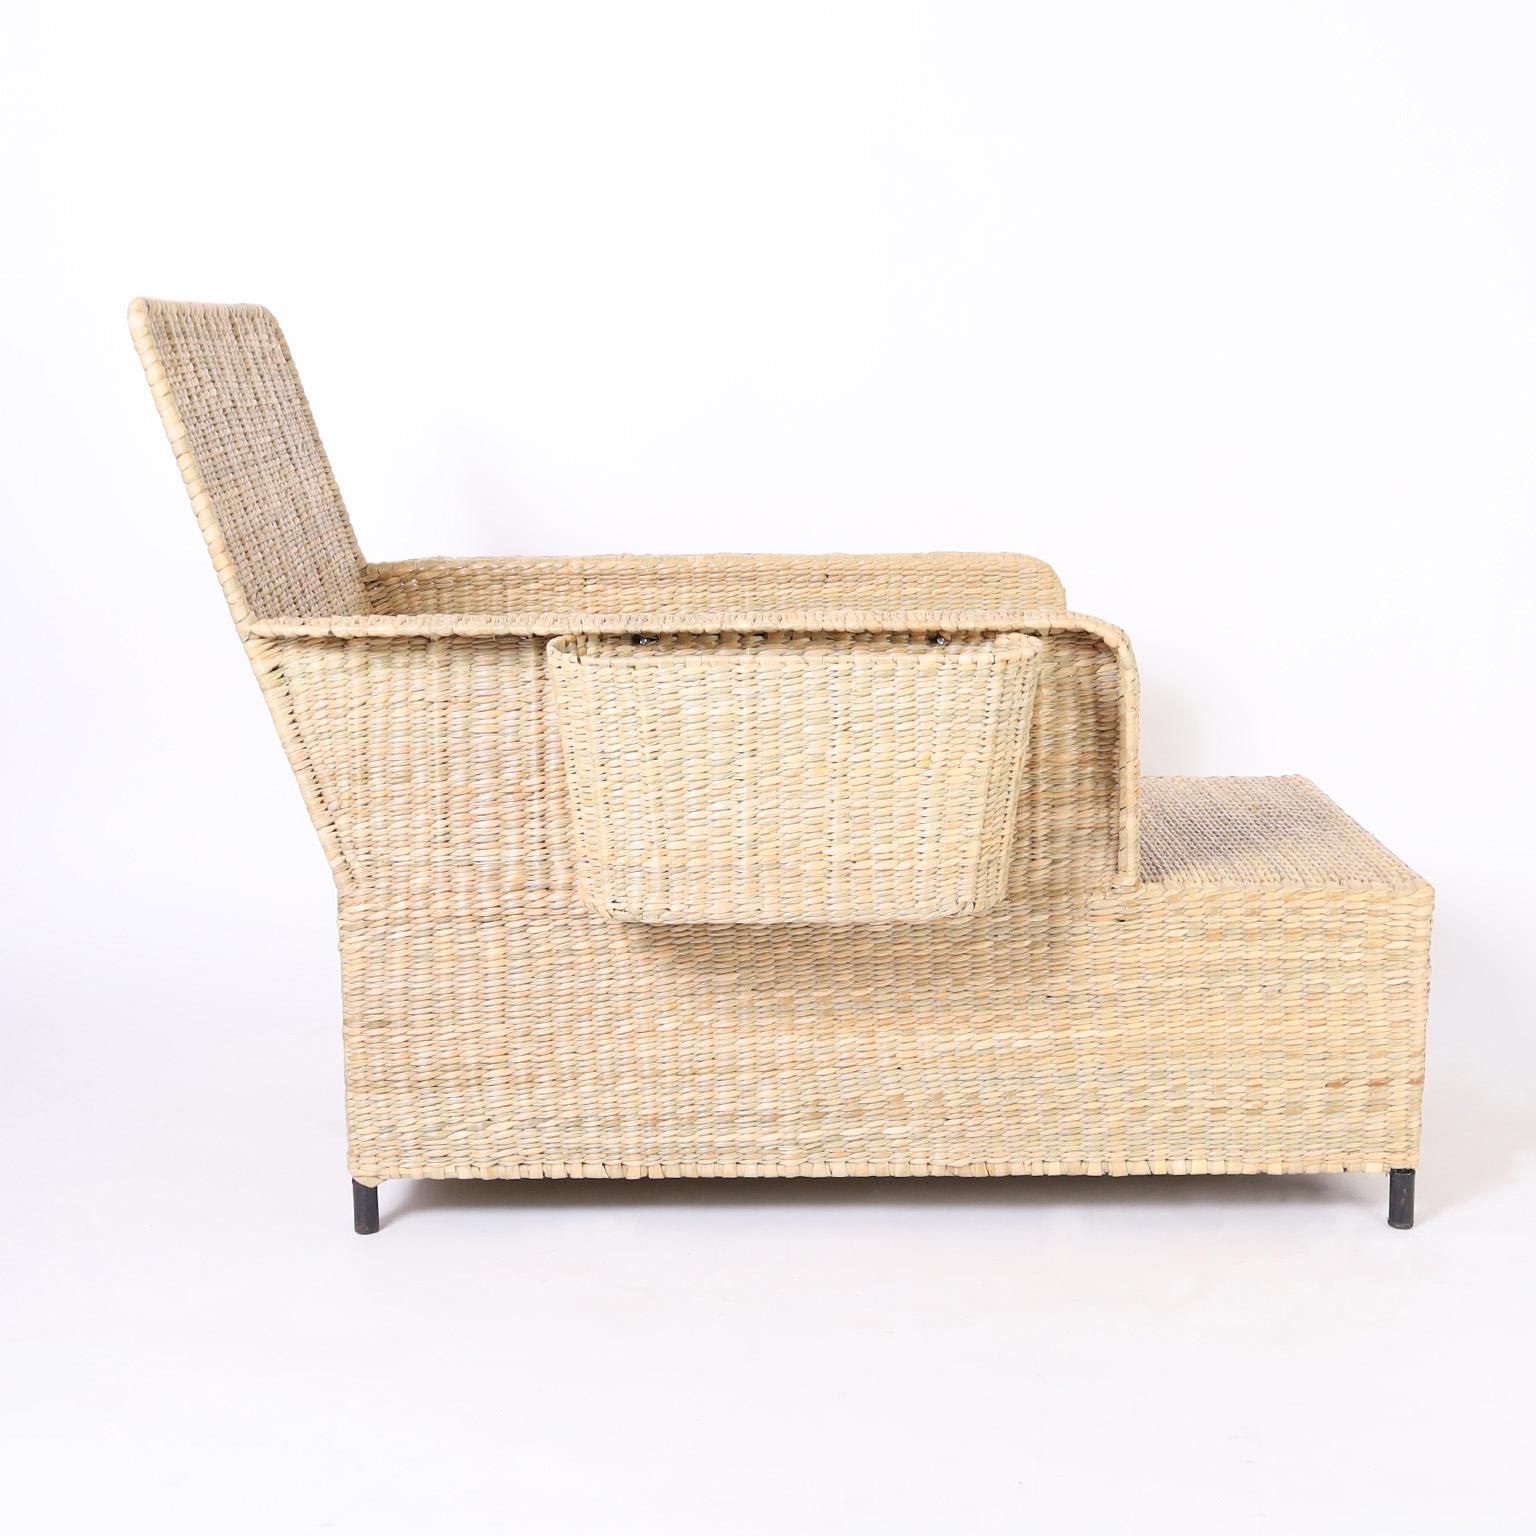 Hand-Woven The Palm Beach Chaise Lounge with Magazine Racks from the FS Flores Collection For Sale